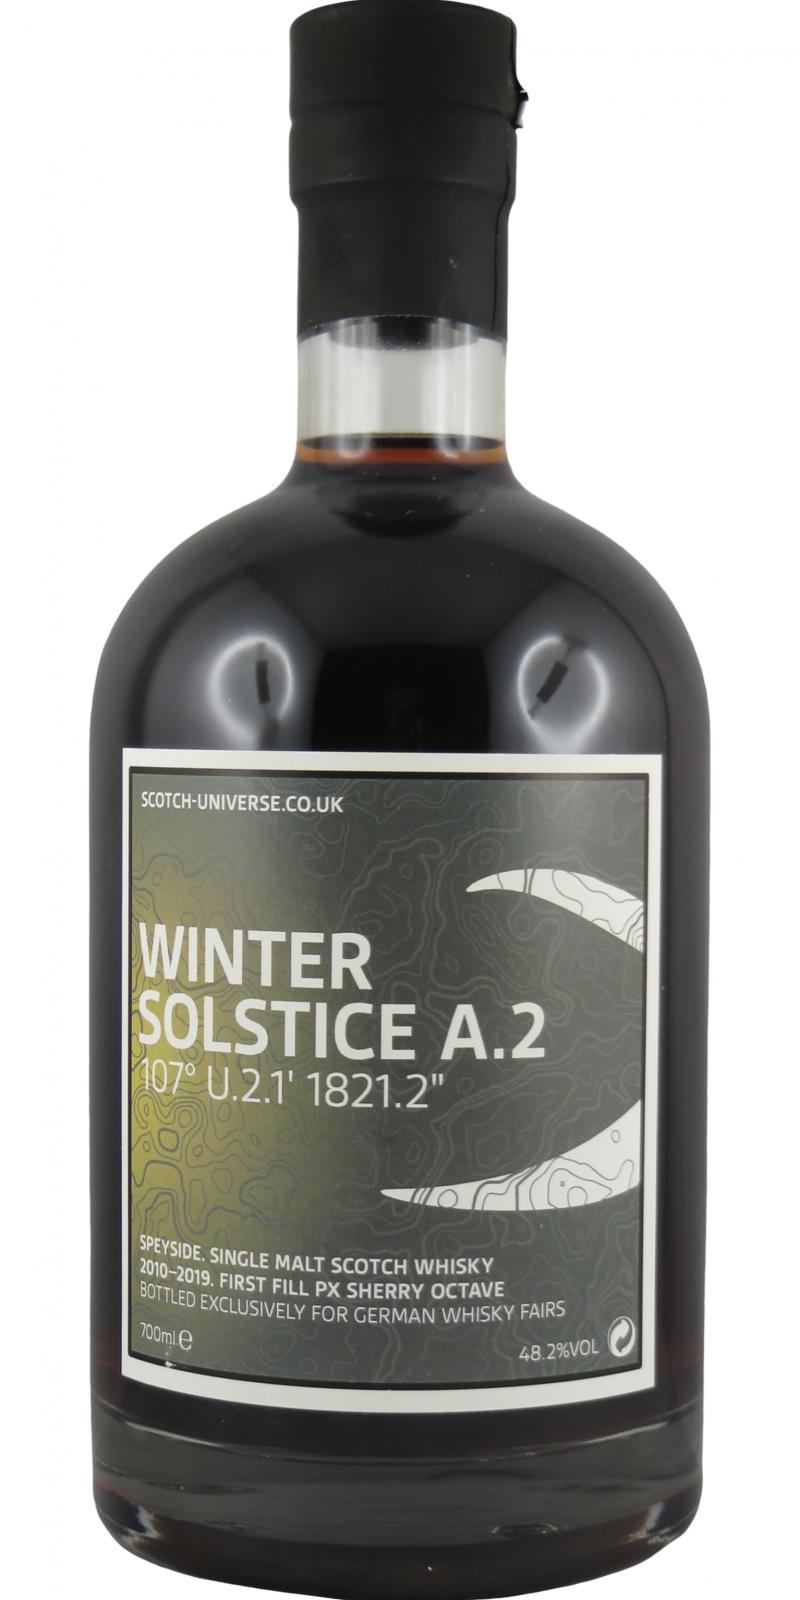 Scotch Universe Winter Solstice A.2 107 U.2.1 1821.2 First Fill PX Sherry Octave German Whisky Fairs 48.2% 700ml